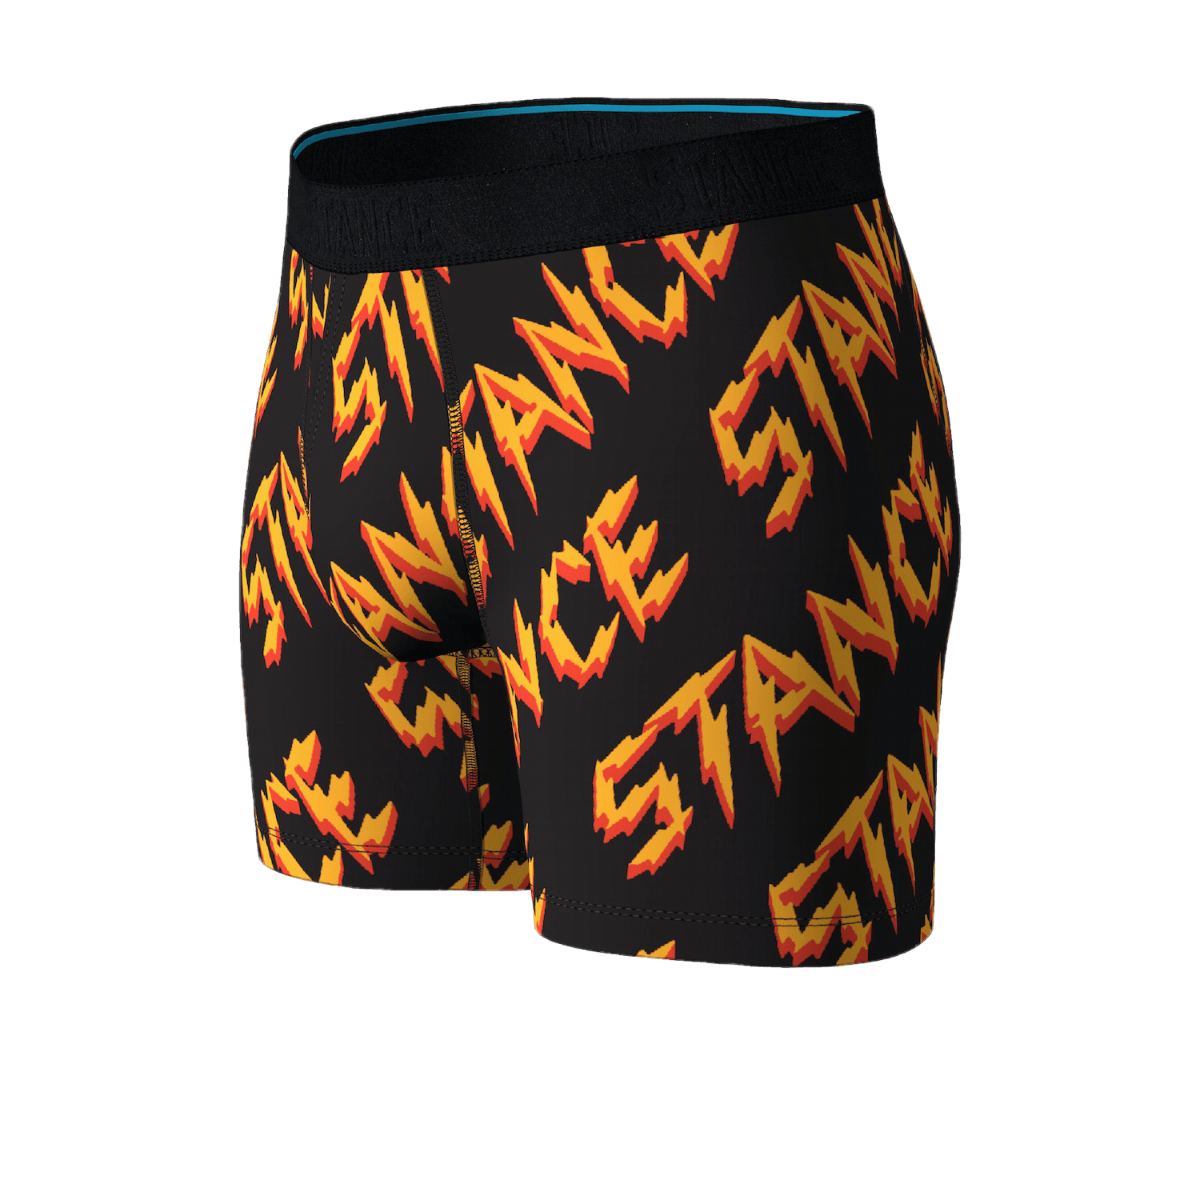 Stance - The Boxer Brief